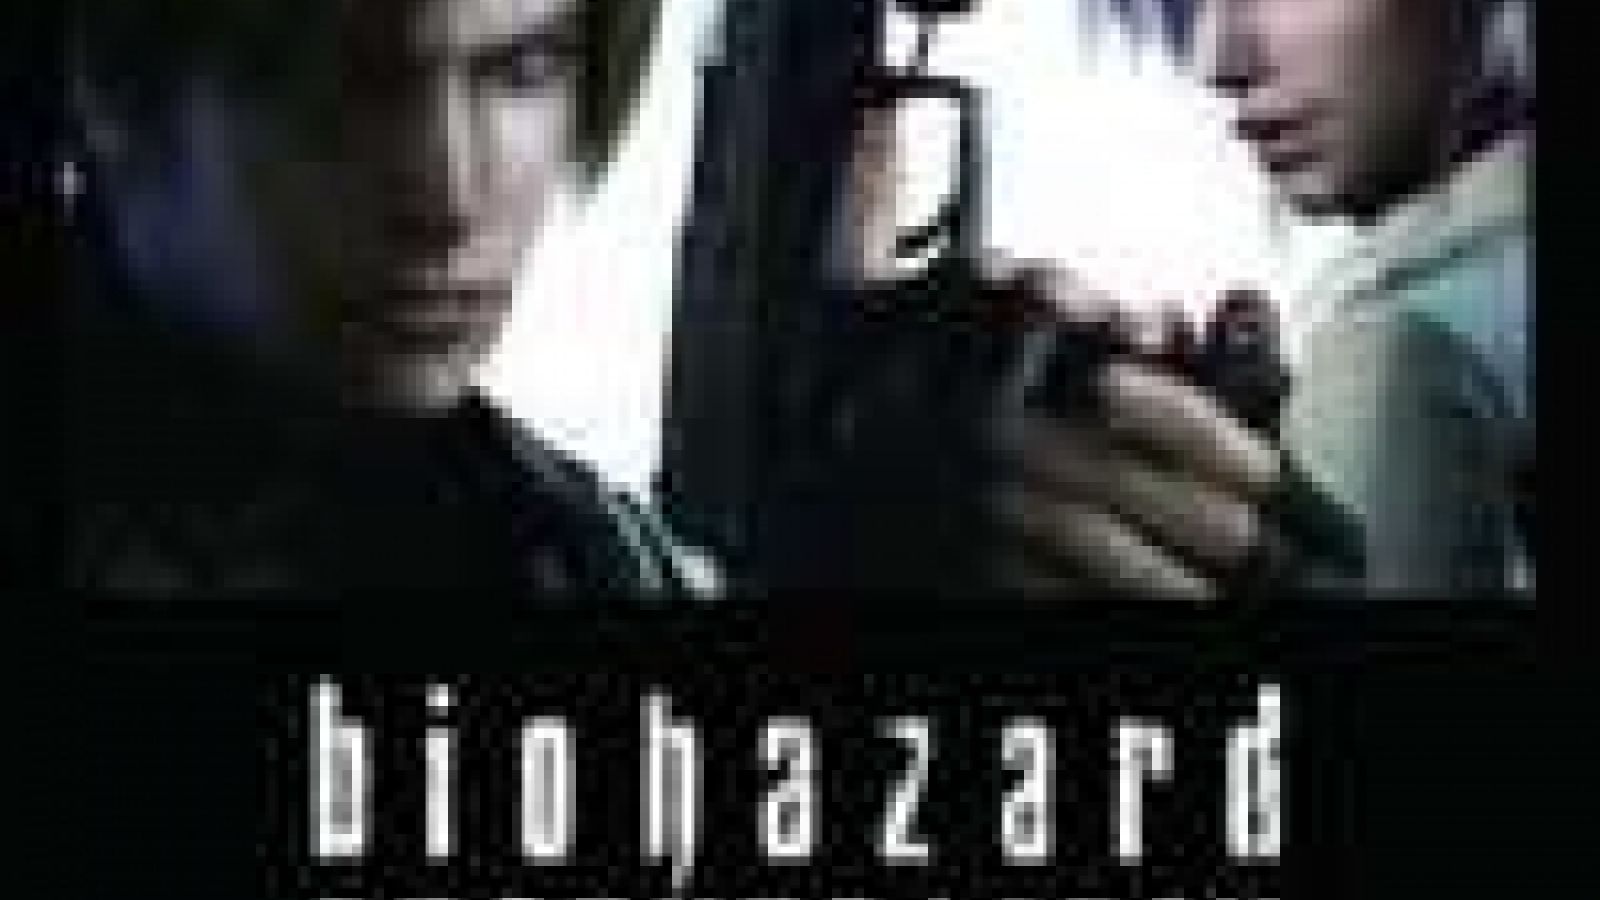 Biohazard: DEGENERATION OFFICIAL SOUNDTRACK © avex. All rights reserved